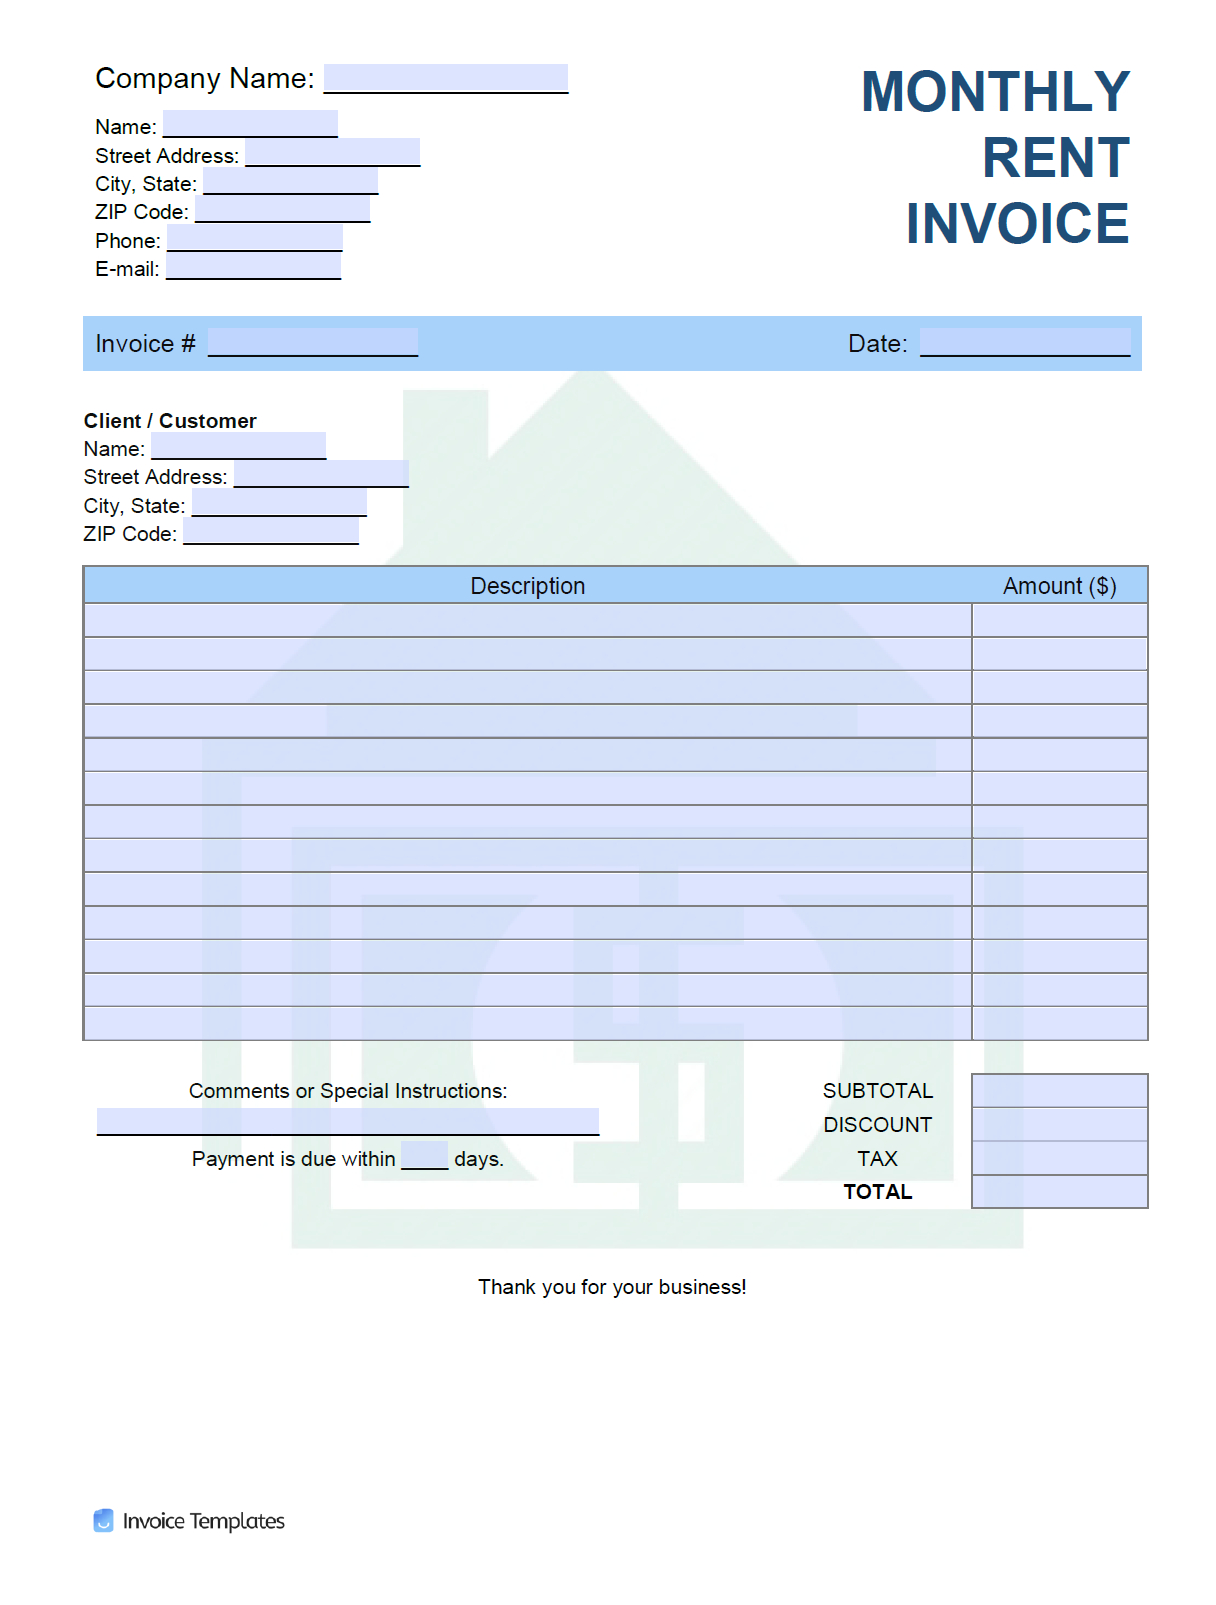 Monthly Rent Invoice Template Various Templates Ideas